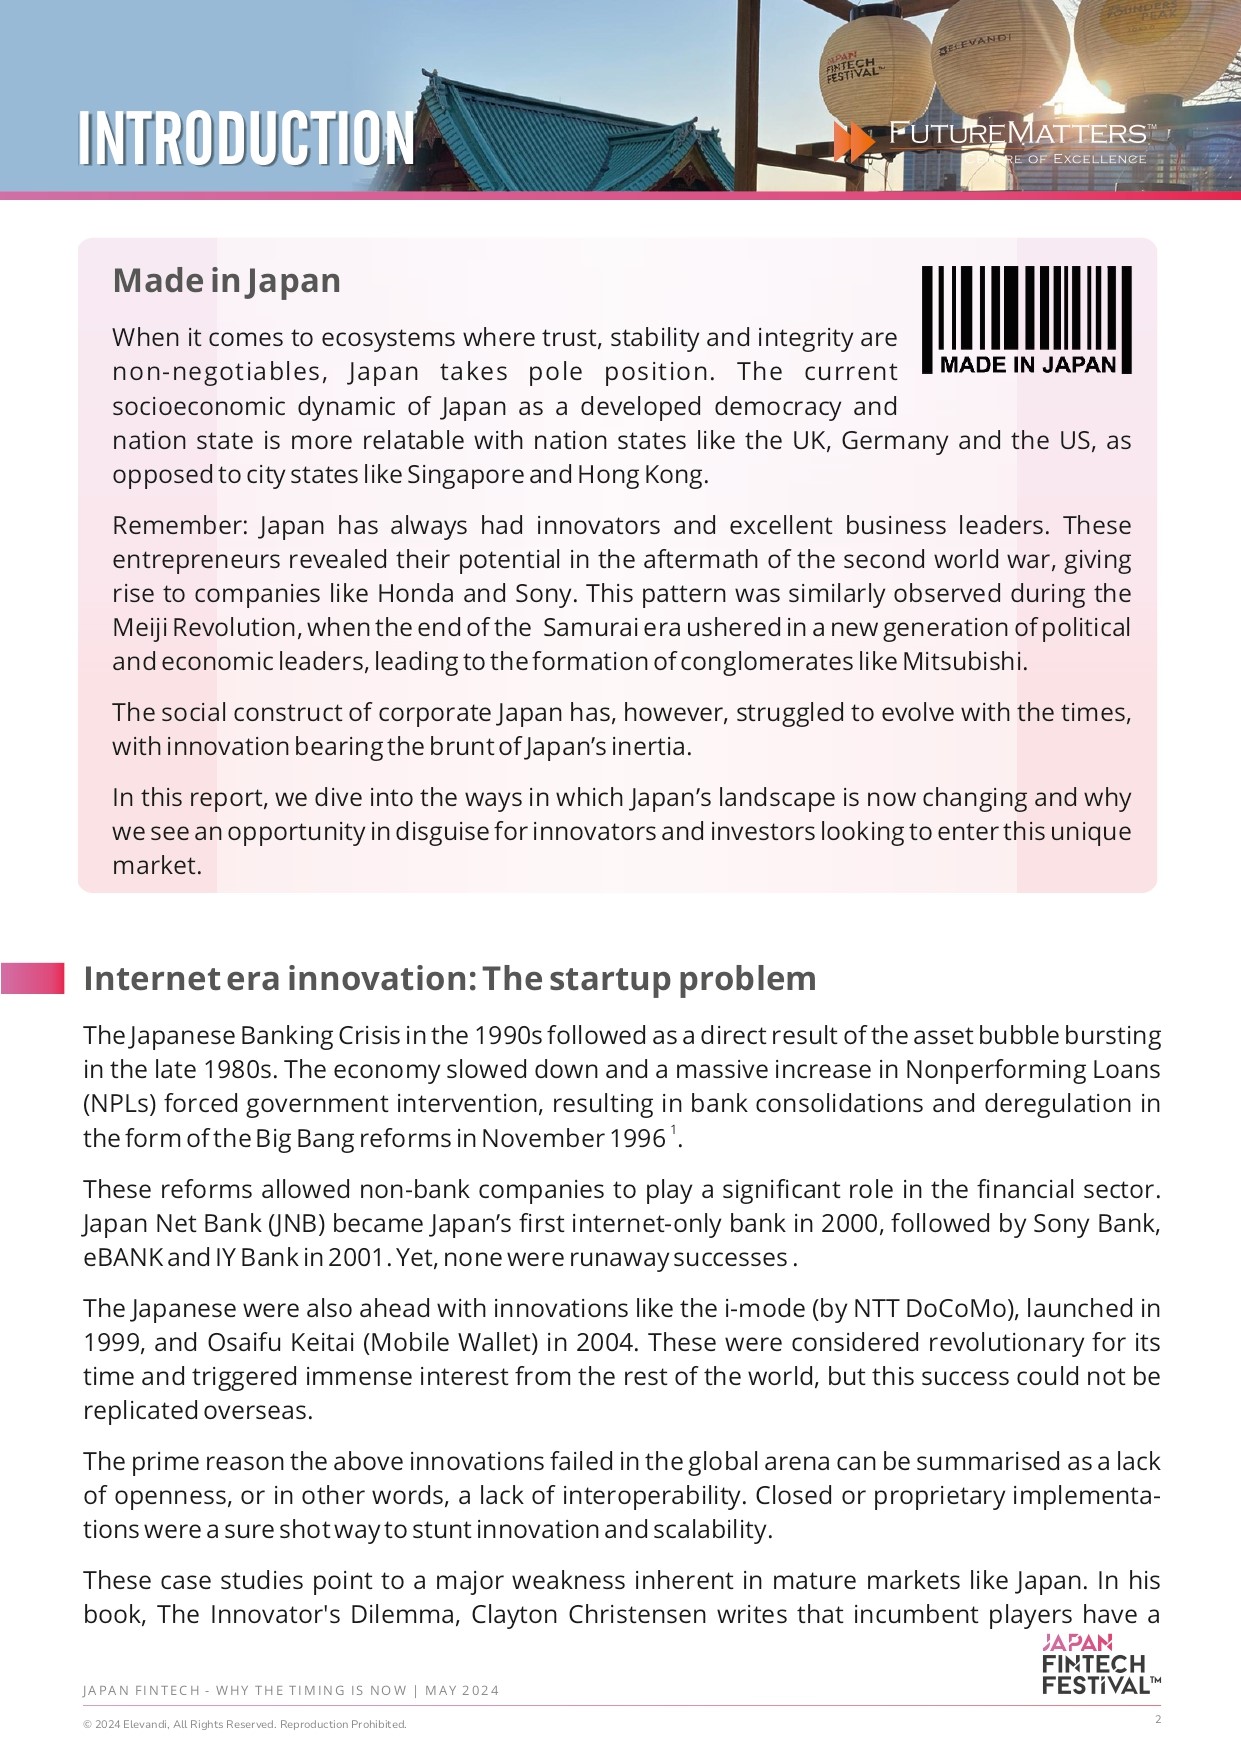 Japan Fintech - Why The Timing Is Now - page-0002